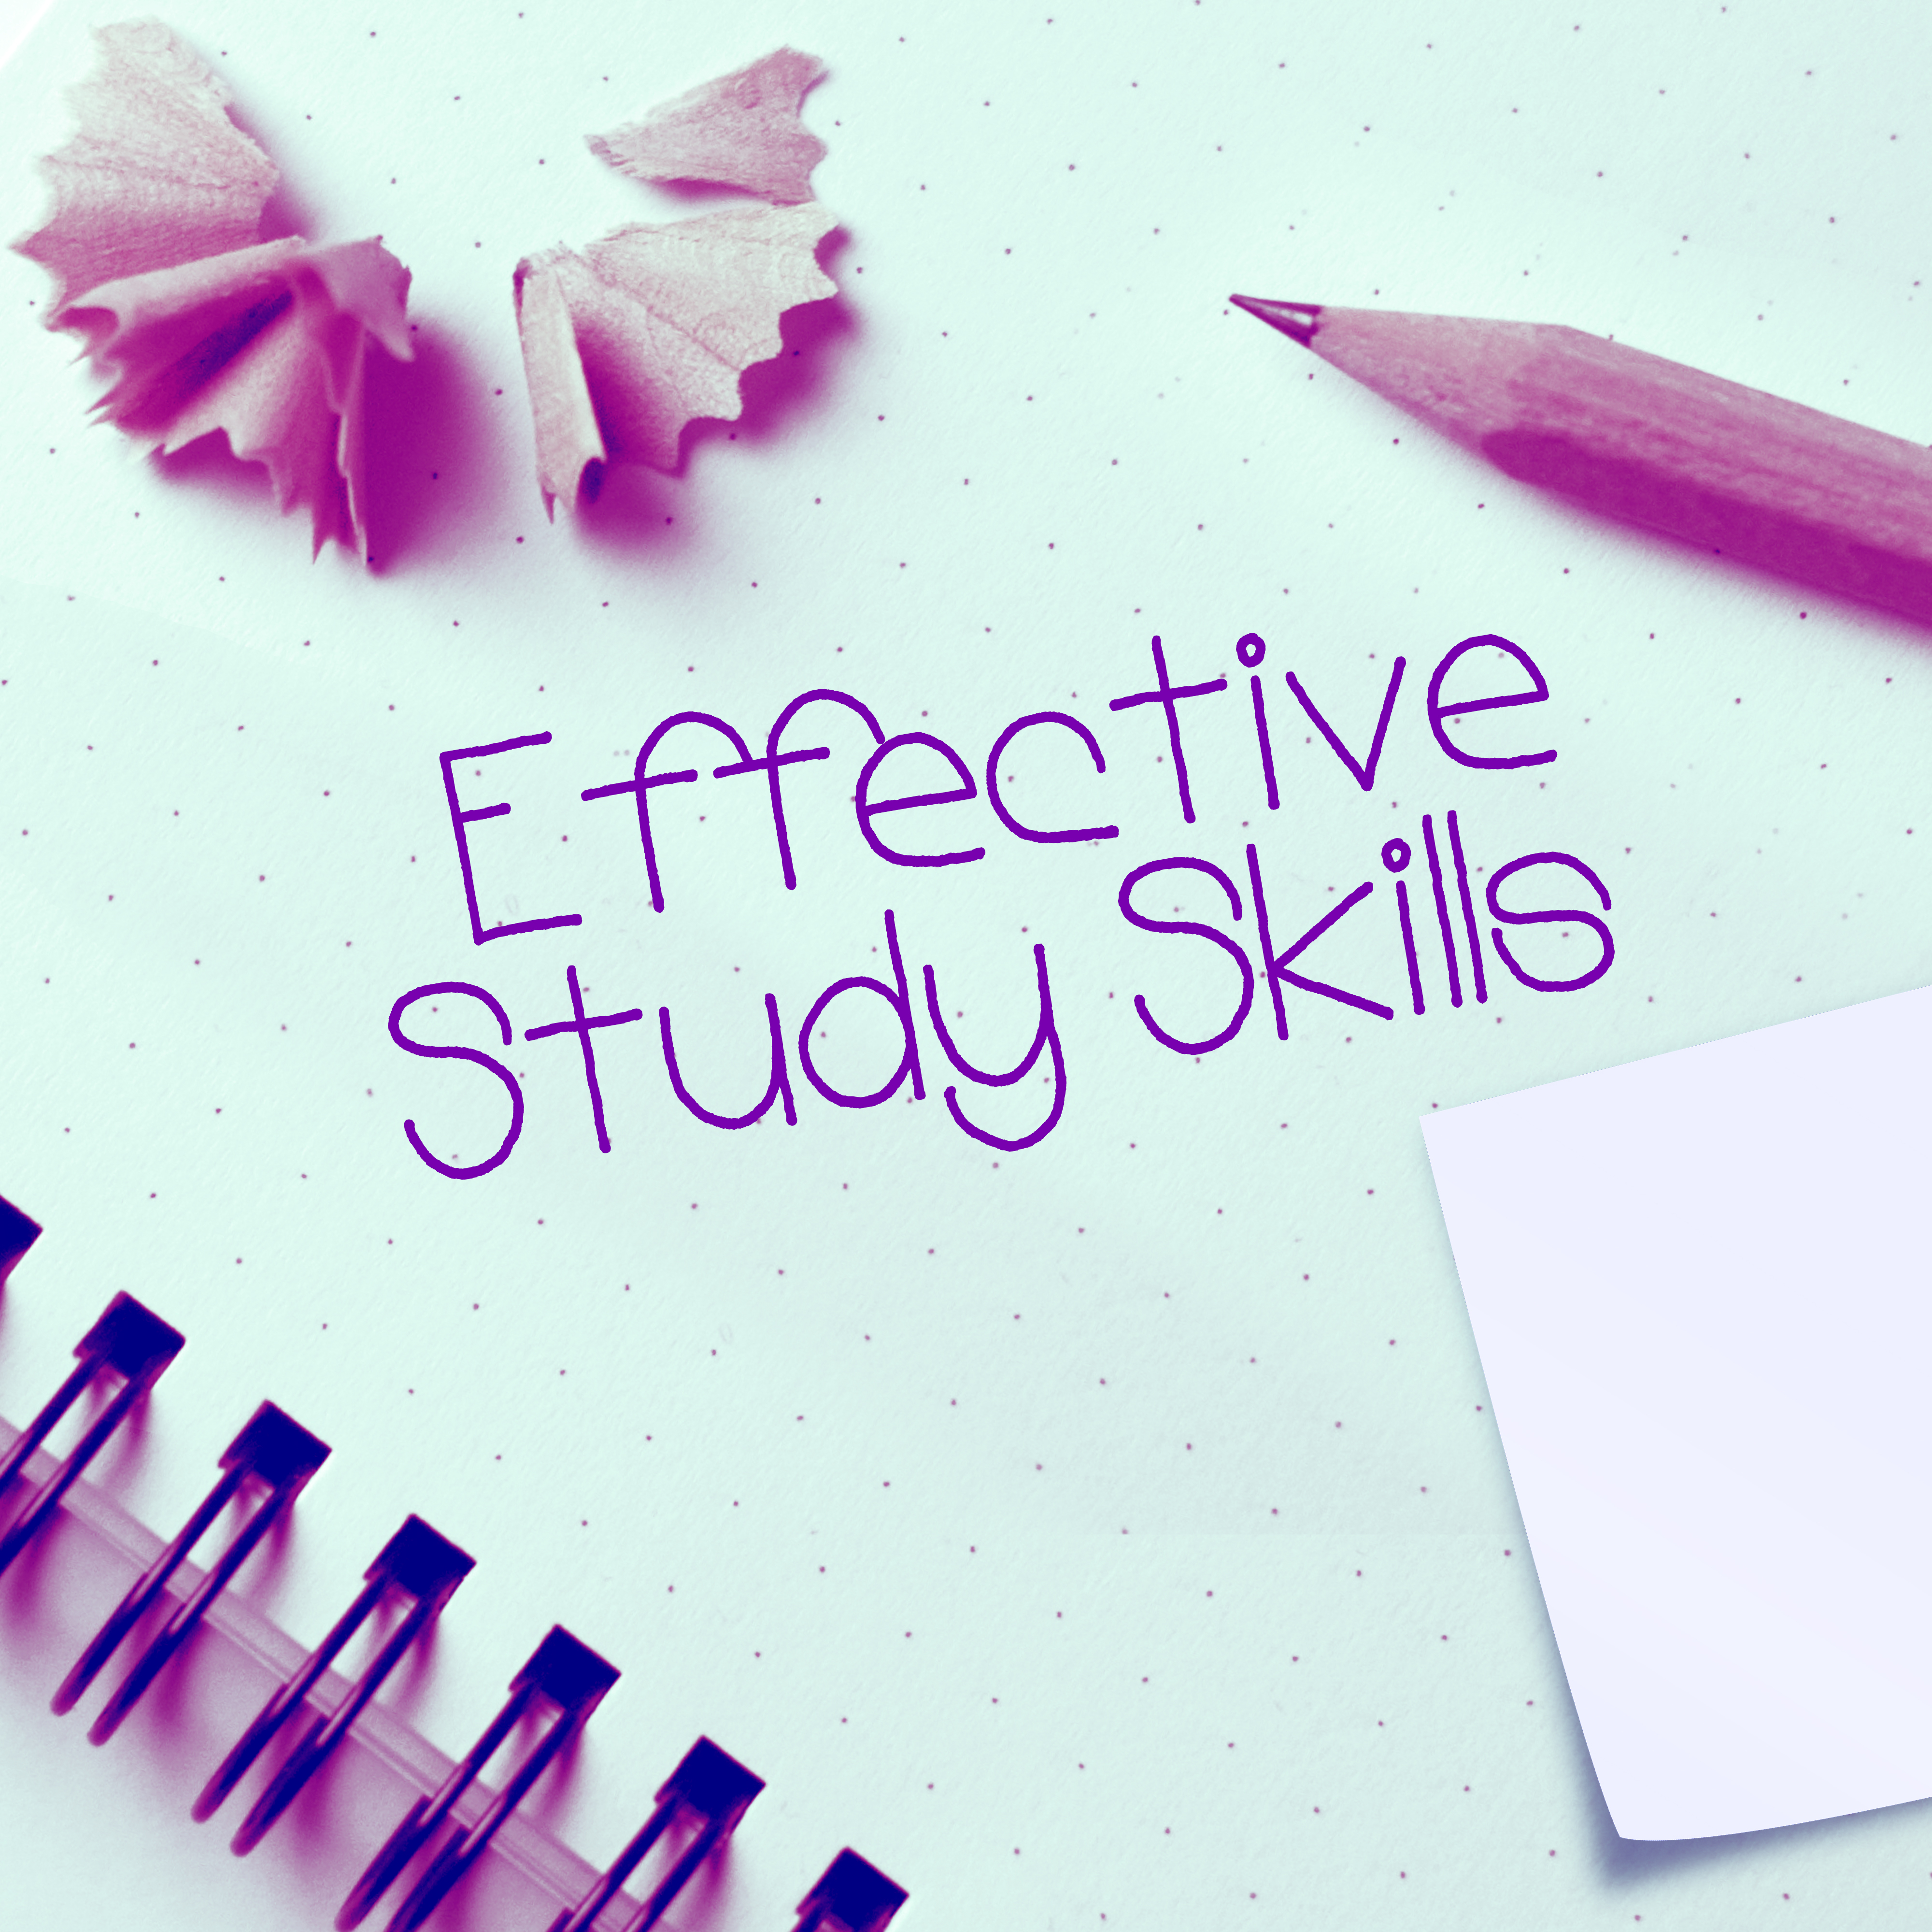 Effective Study Skills - Study Music Playlist, Train Your Brain with Instrumental Music to Improve Memory